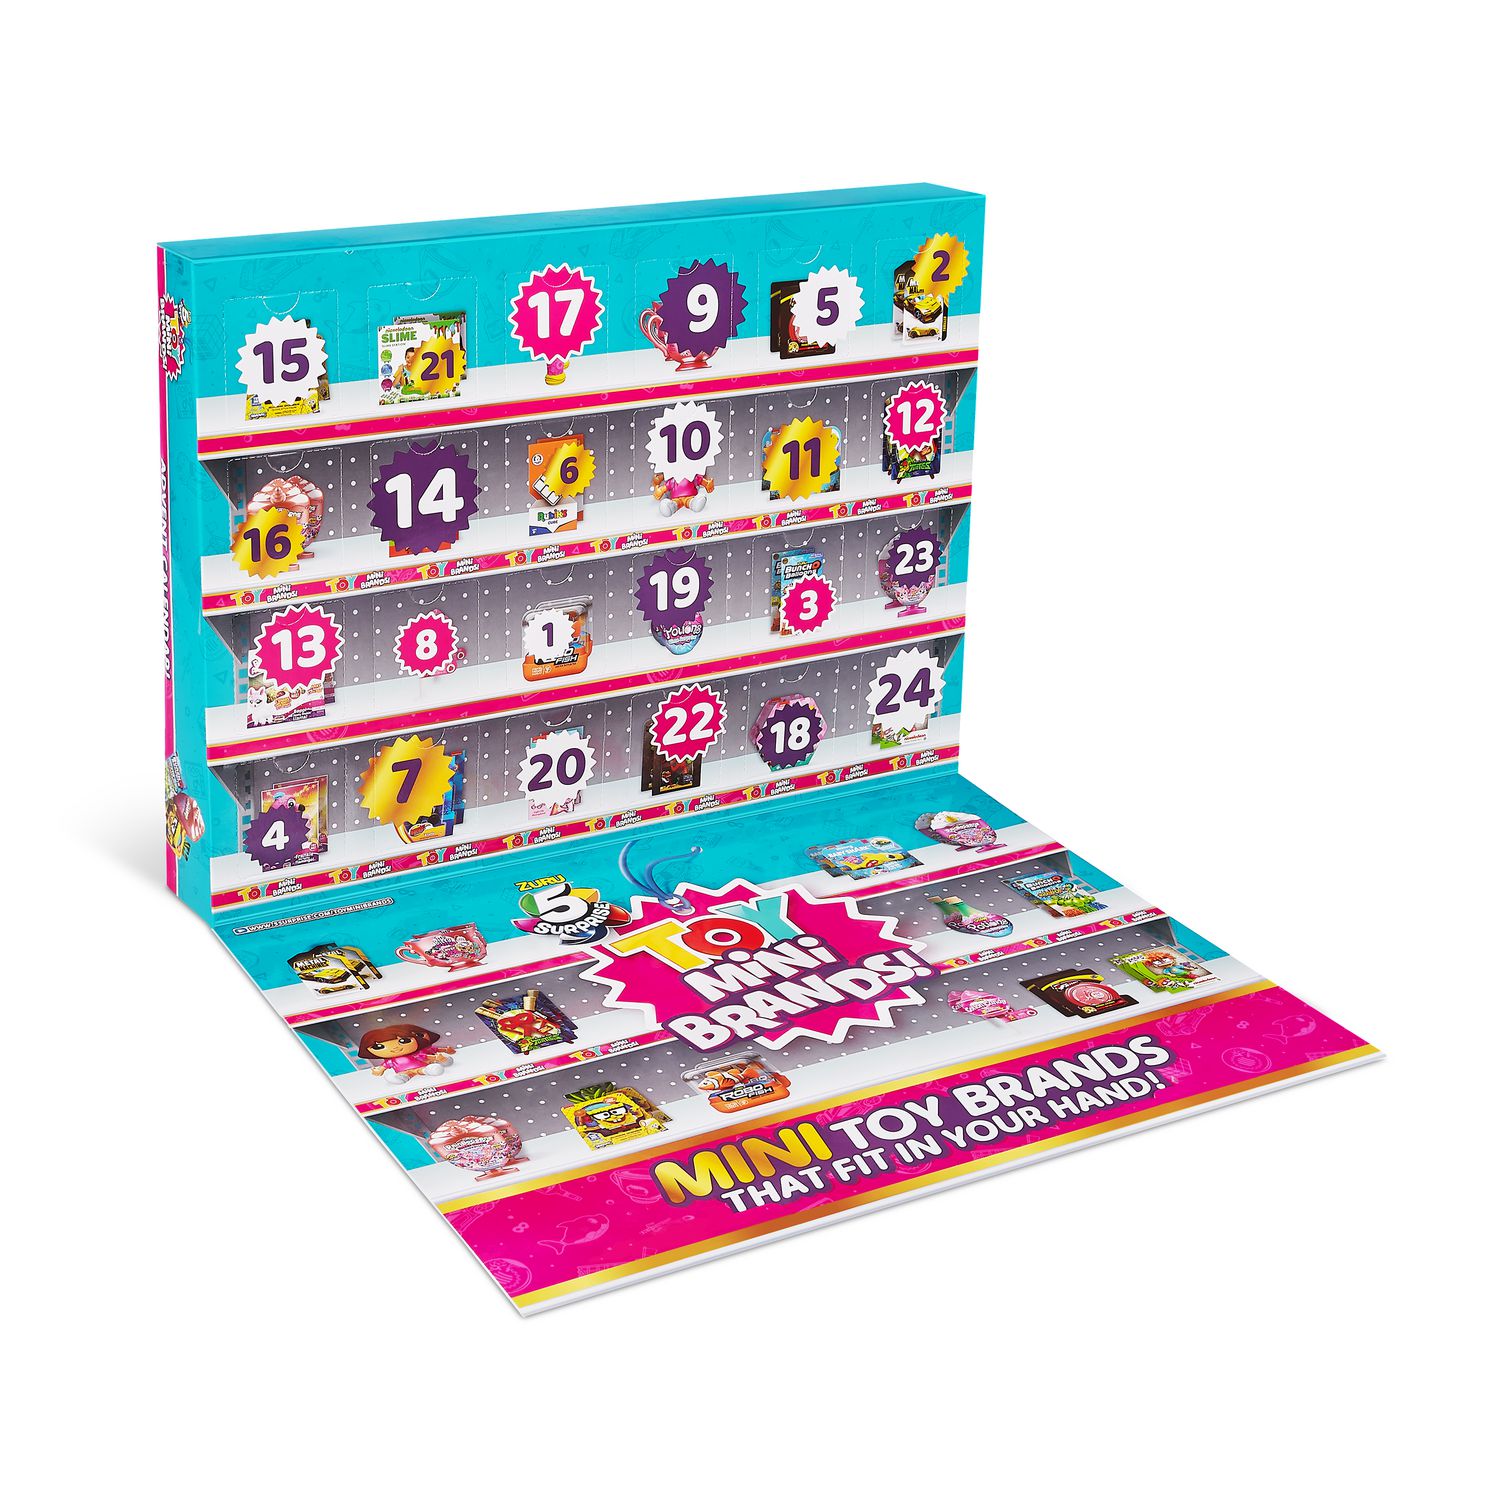 Mini Brands Series 4 Limited Edition Advent Calendar with 6 Exclusive Minis  by ZURU 